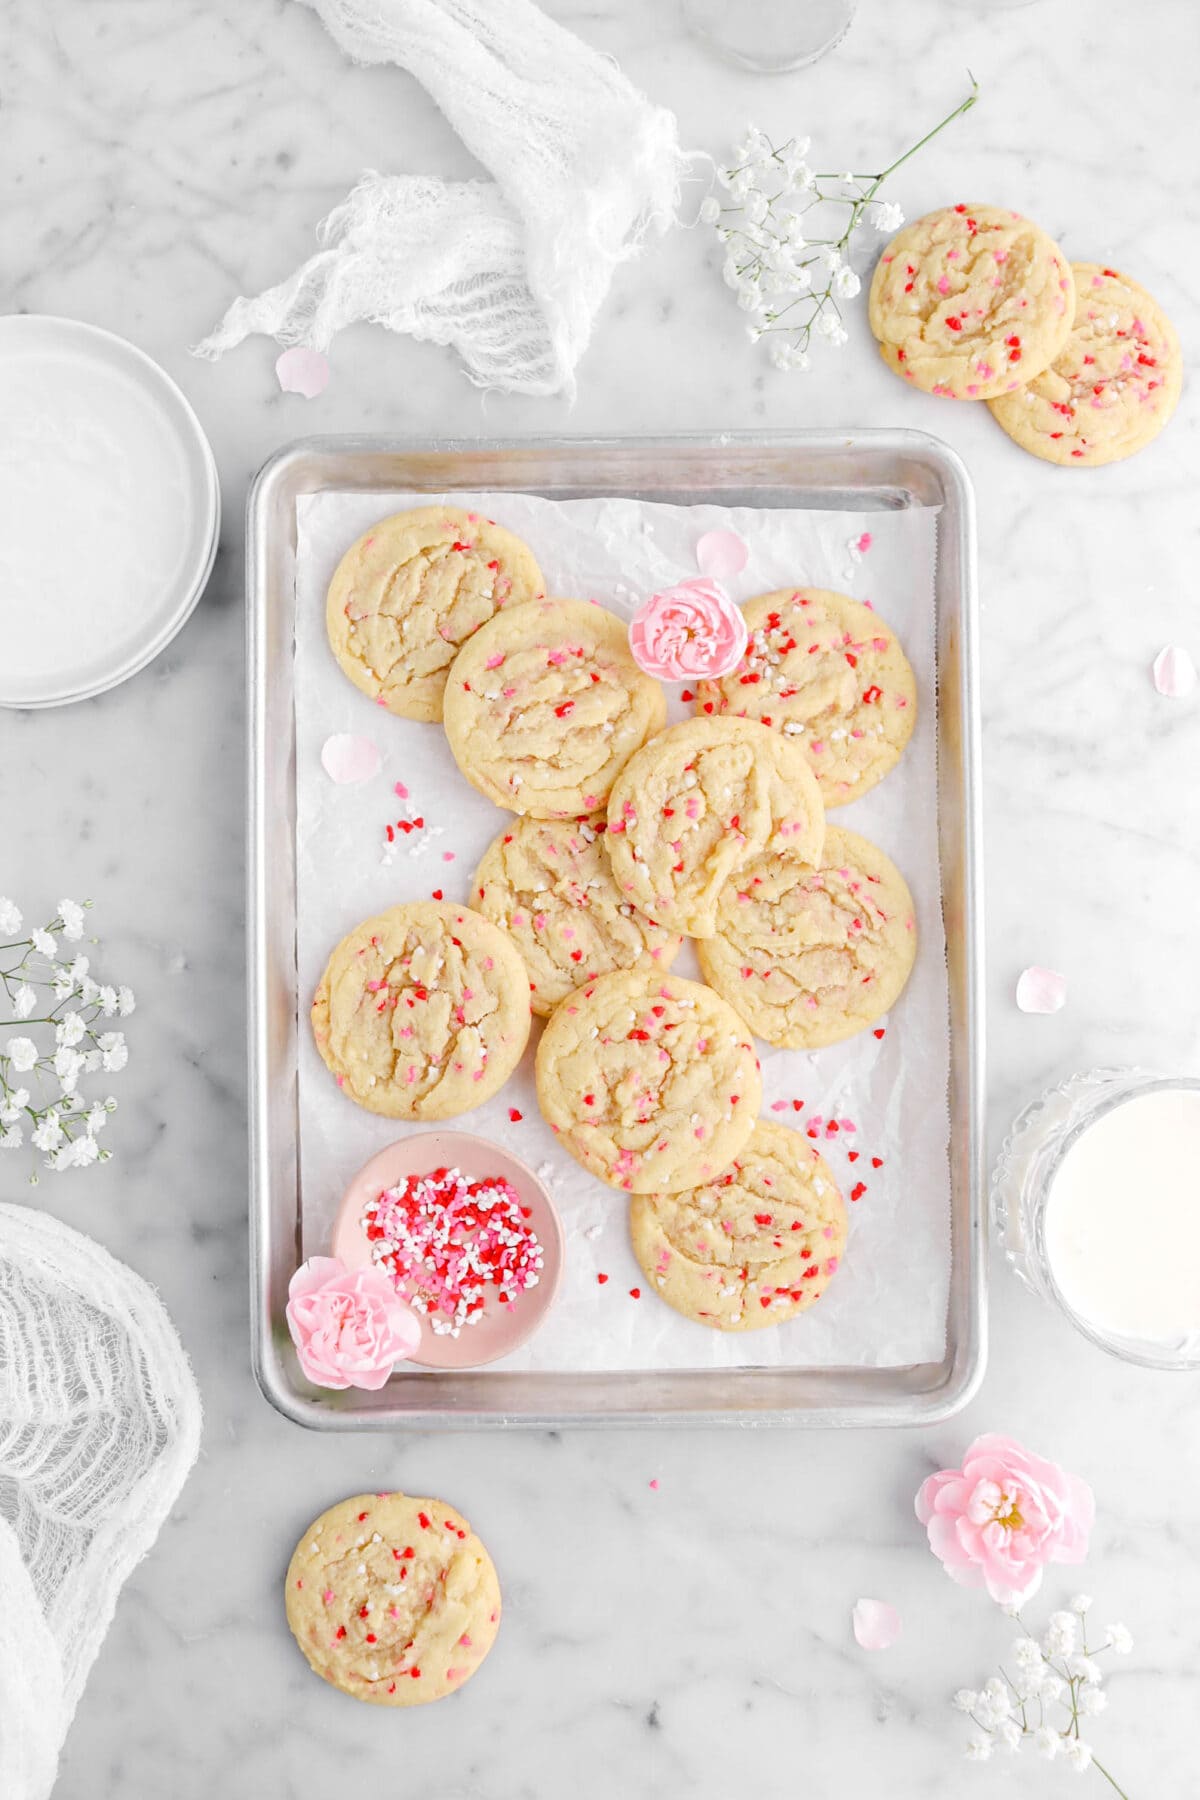 overhead shot of piled sugar cokies in parchment lined sheet pan with one cookie missing a bite, a bowl of sprinkles, and pink carnations in sheet pan, with more cookies and flowers around on marble surface.